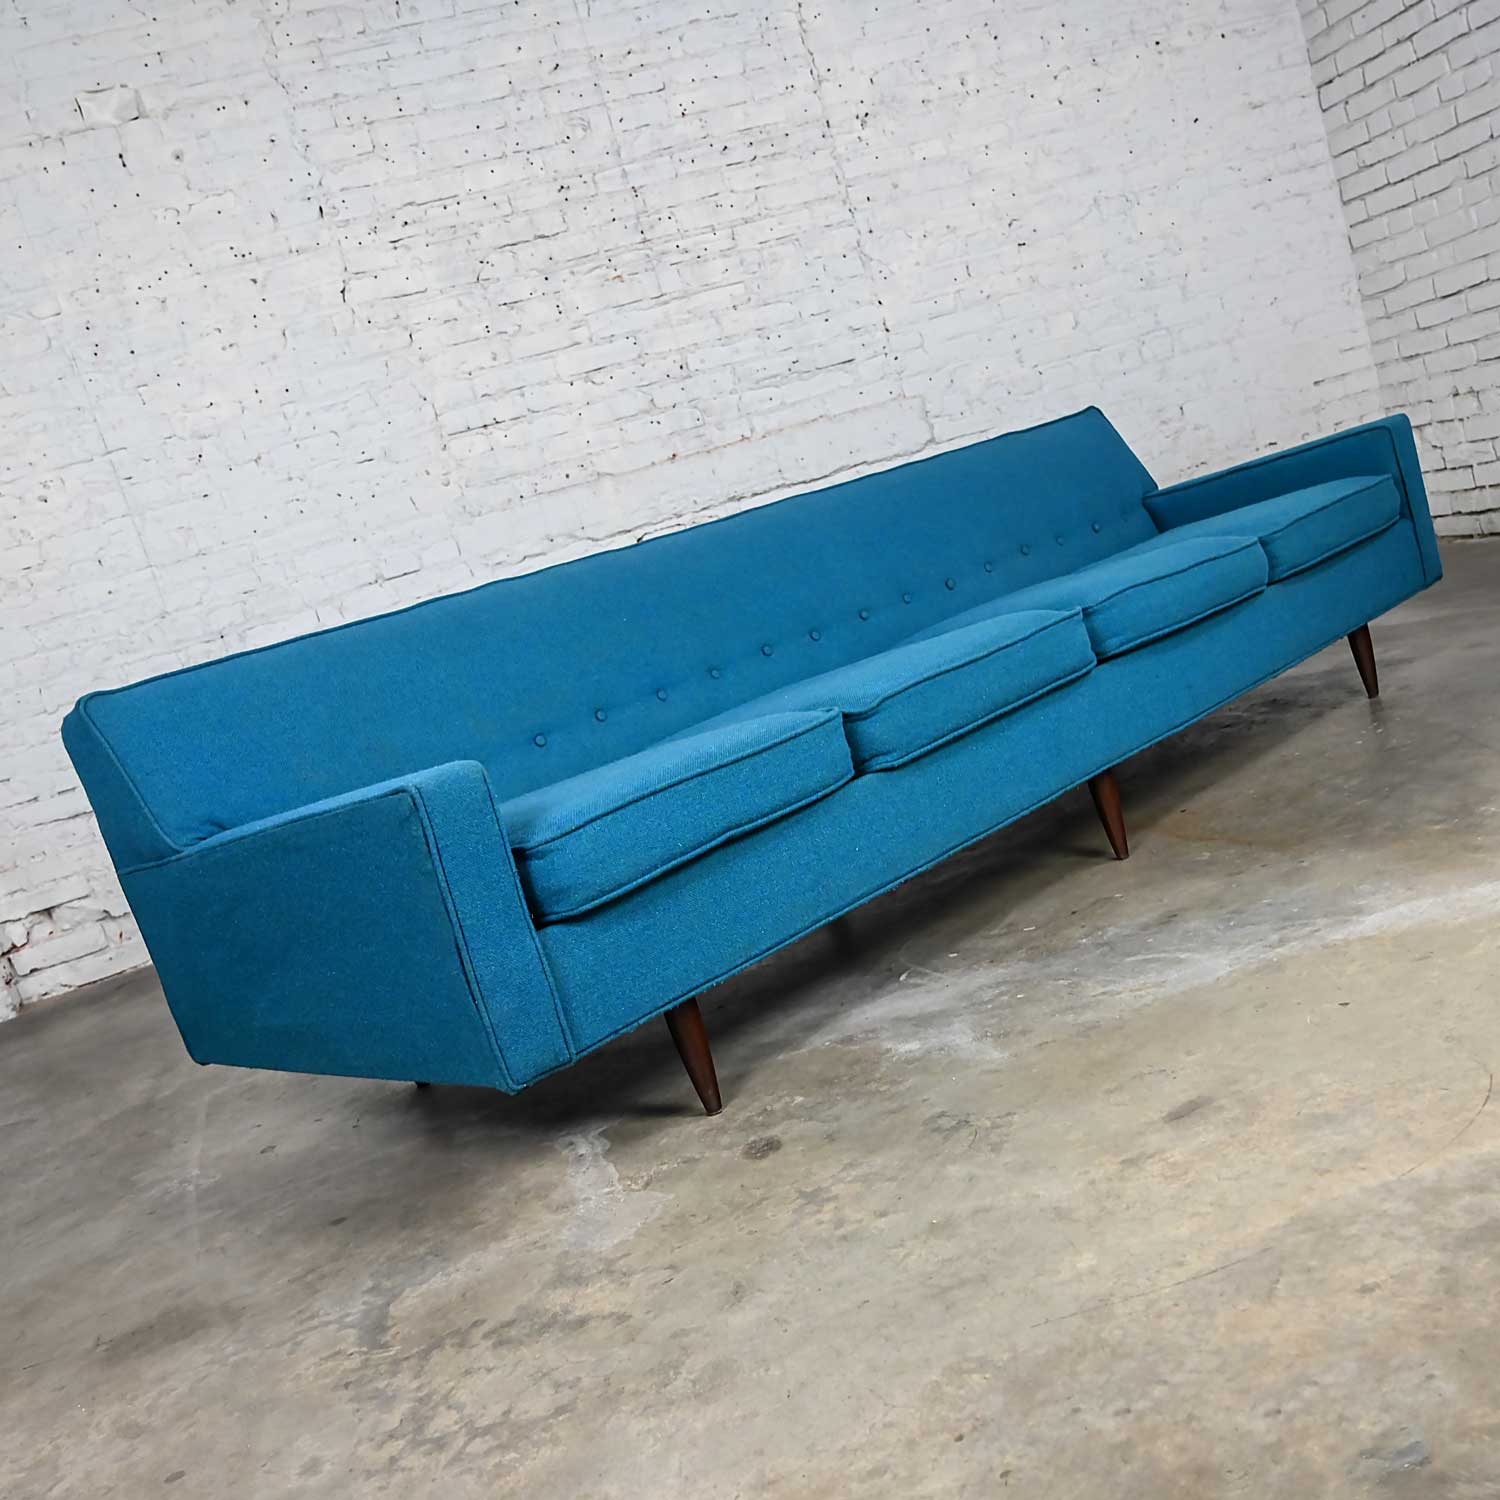 4 cushion couch